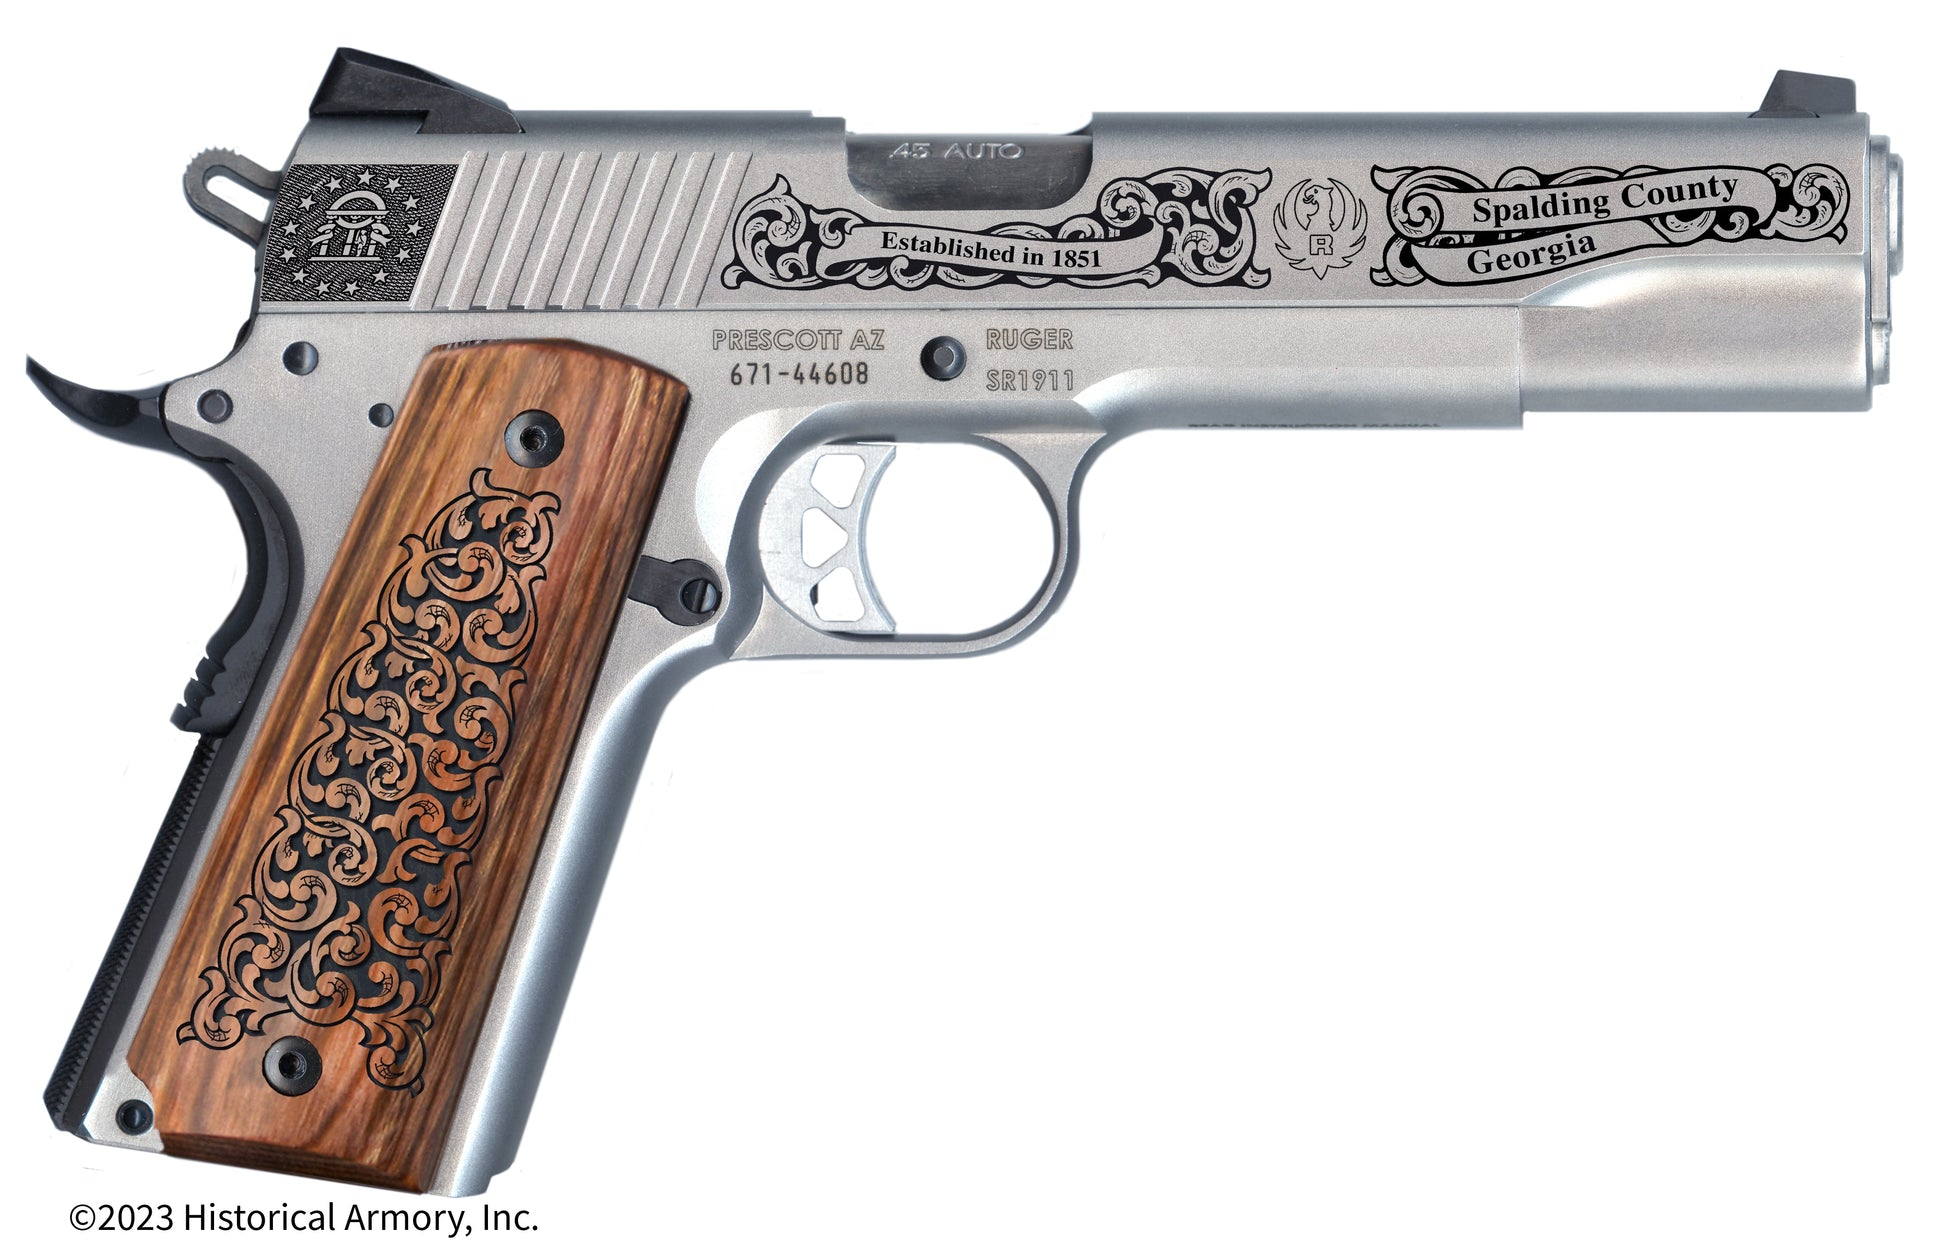 Spalding County Georgia Engraved .45 Auto Ruger 1911